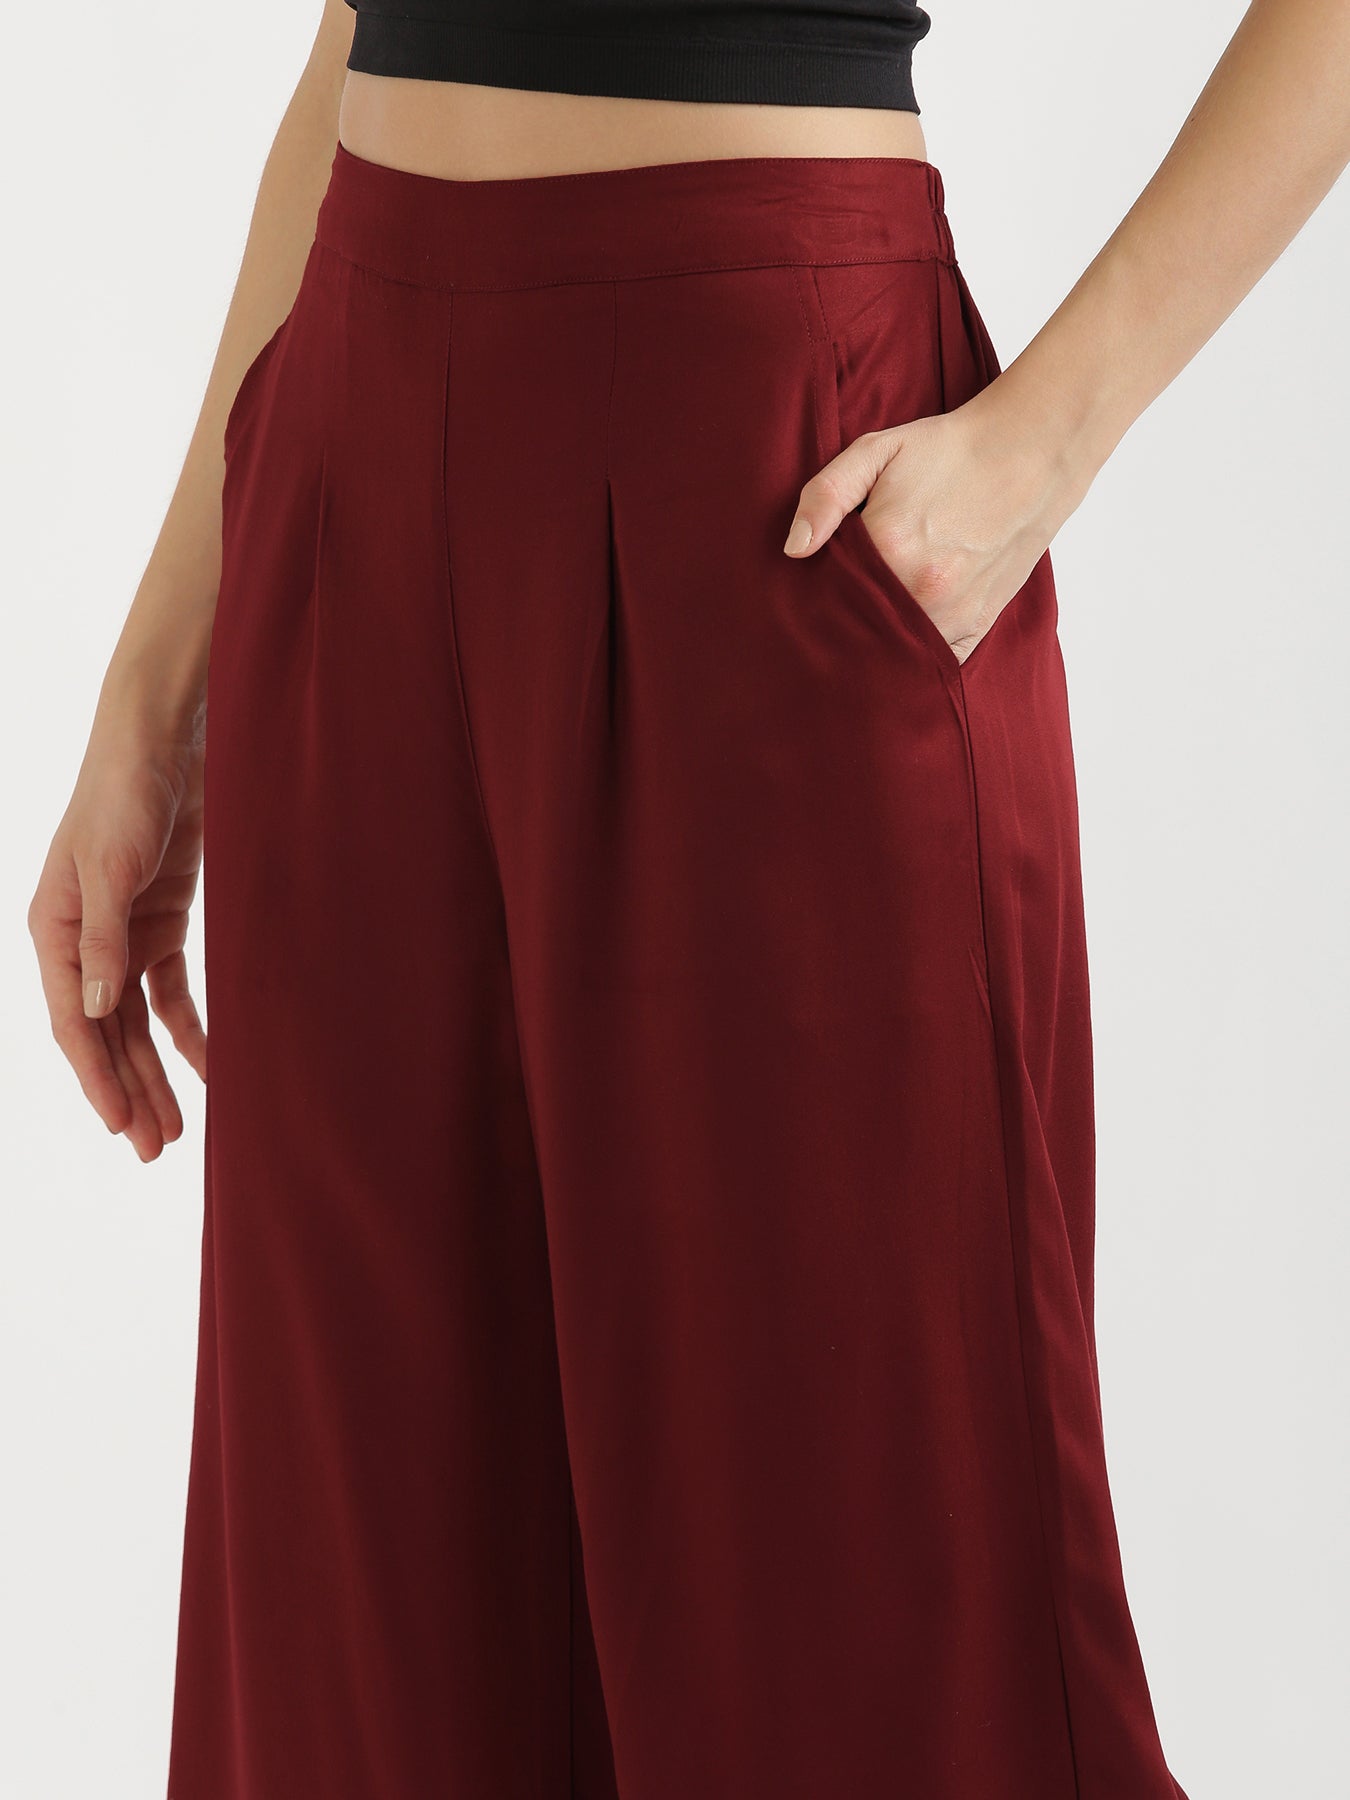 Palazzo Pants For Women Combo in Latur - Dealers, Manufacturers & Suppliers  - Justdial